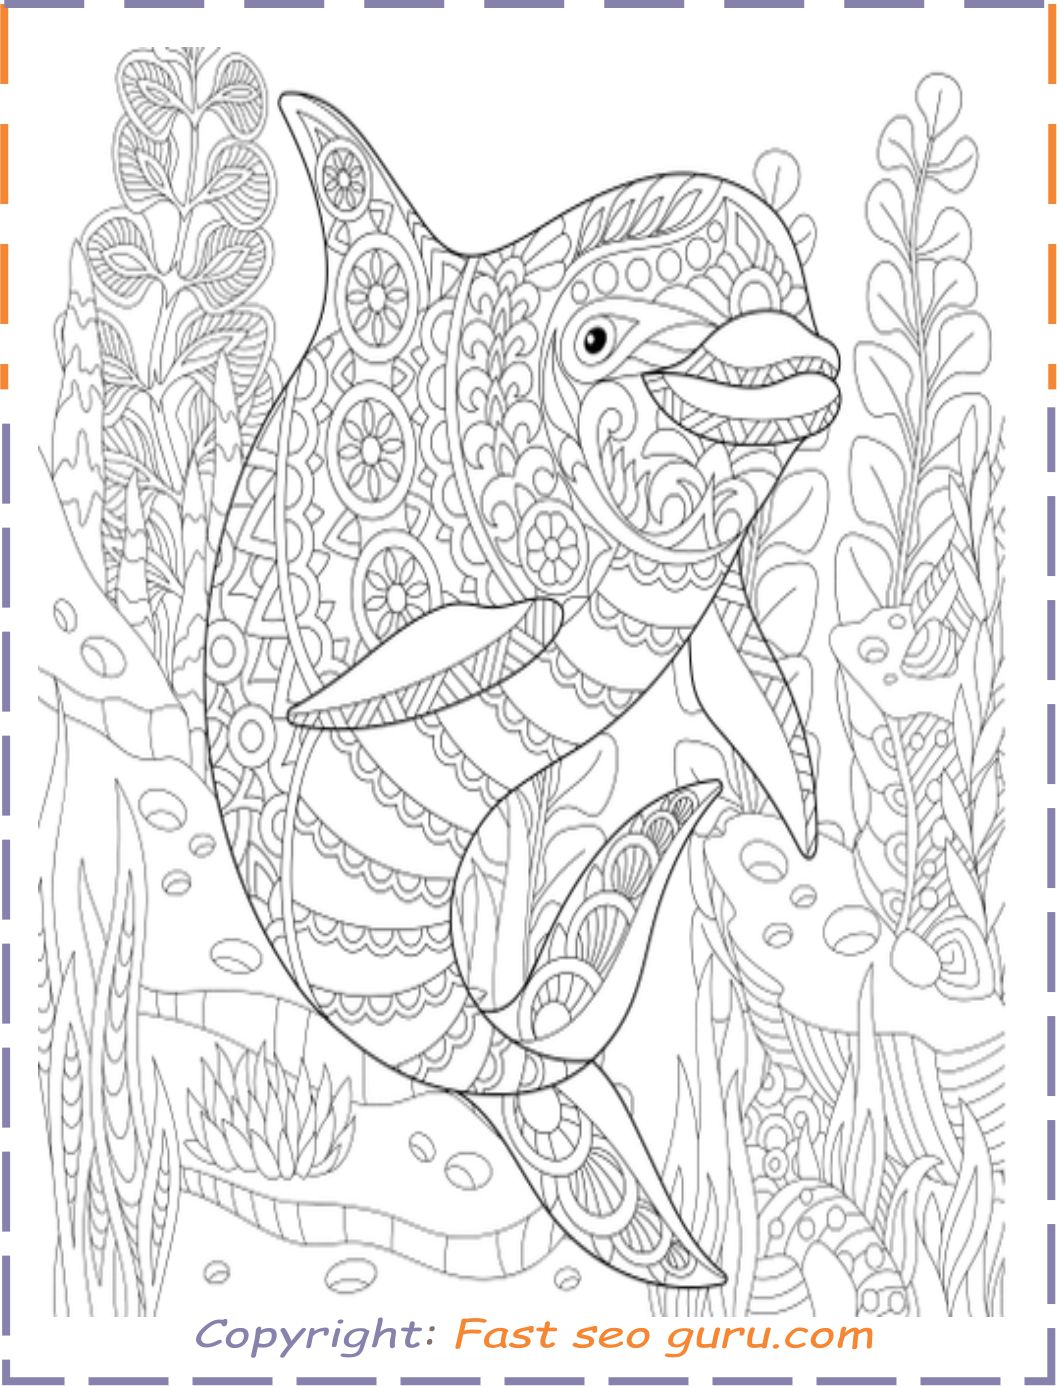 Dolphin colouring pages for adults